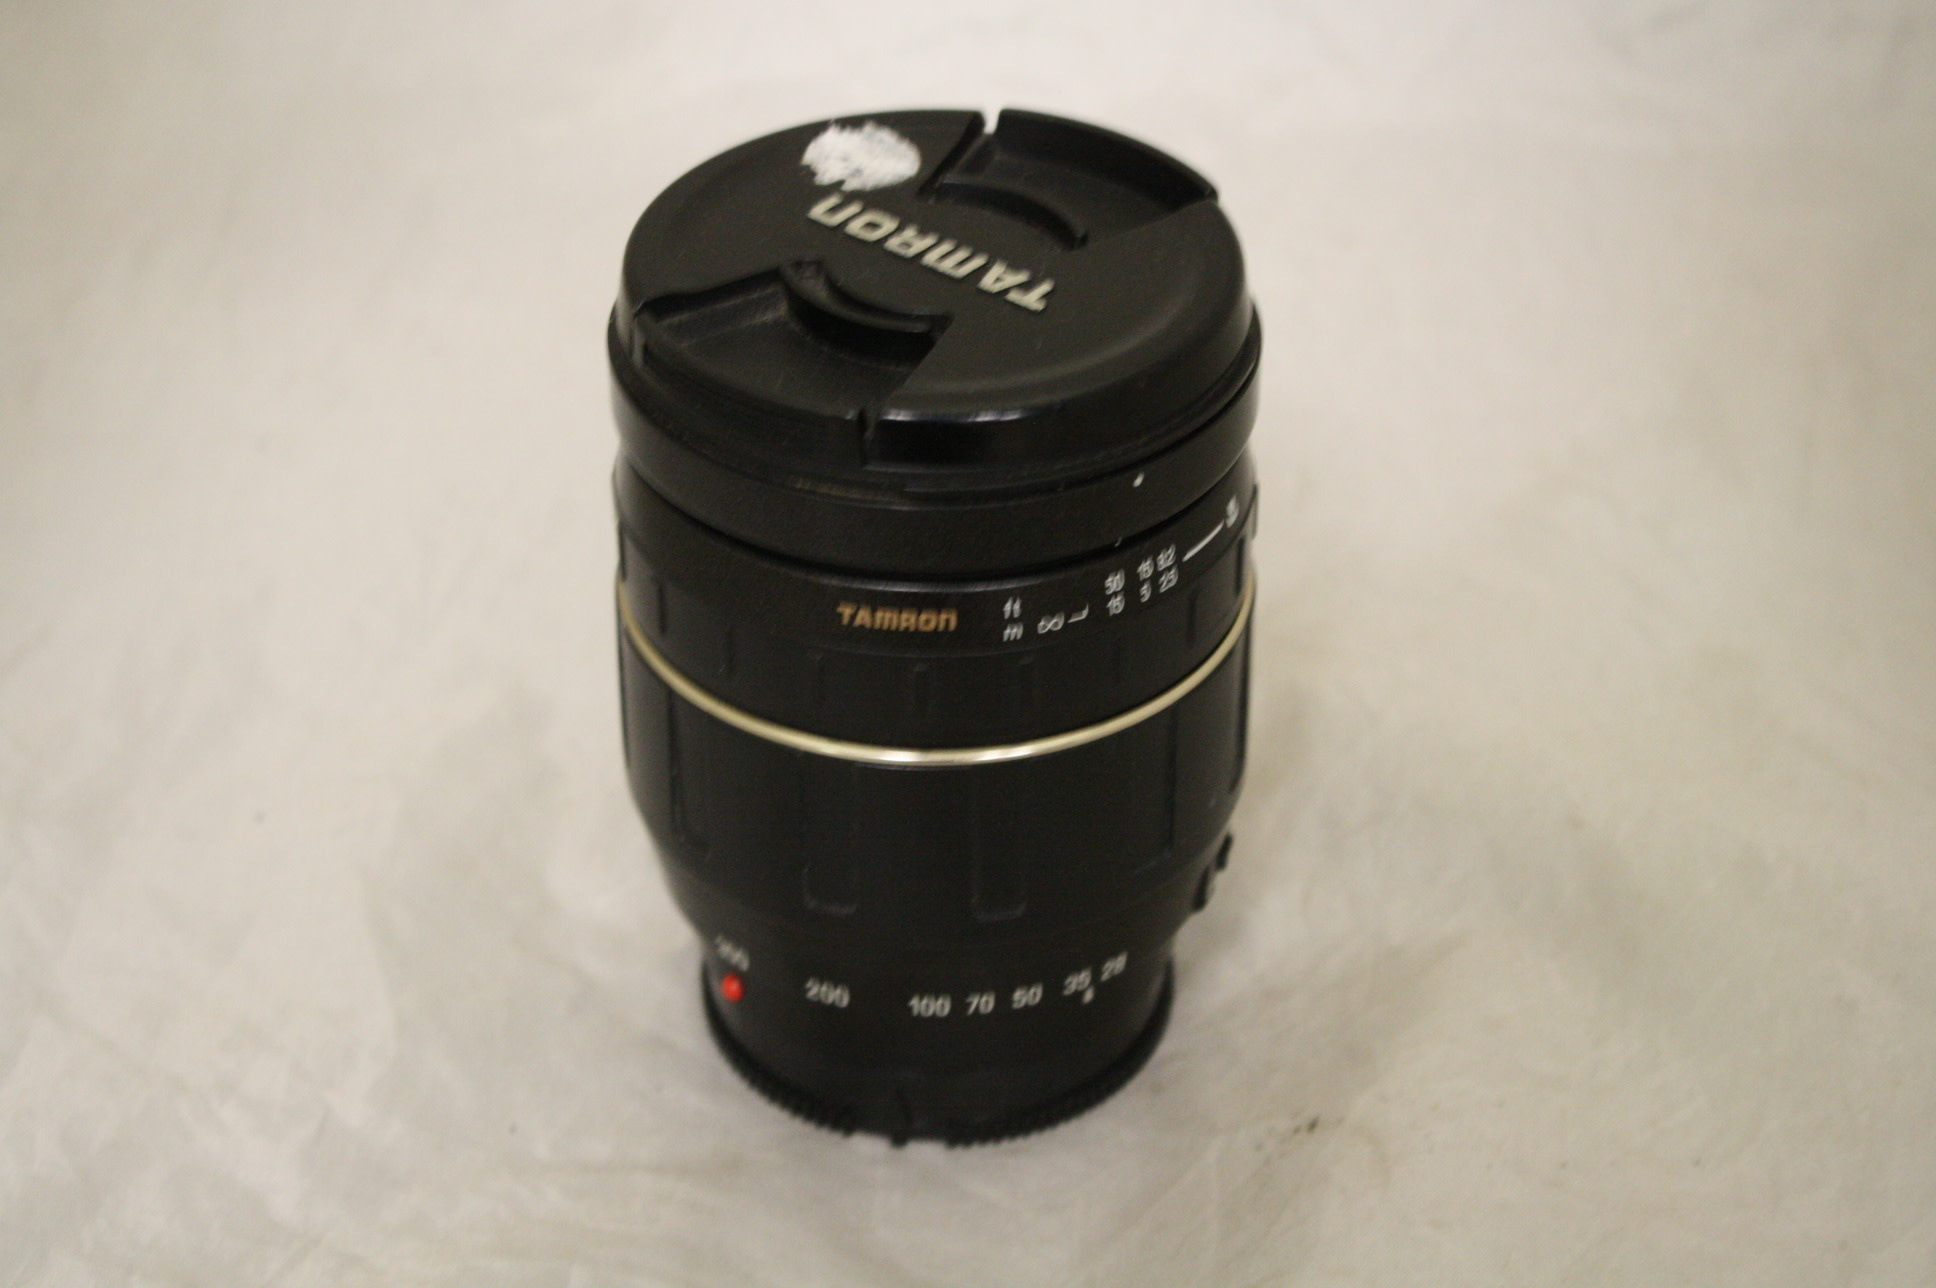 Tamron 28-300mm f3.5-6.3 Aspherical LD Lens for Sony/Maxxum (Pre-owned)